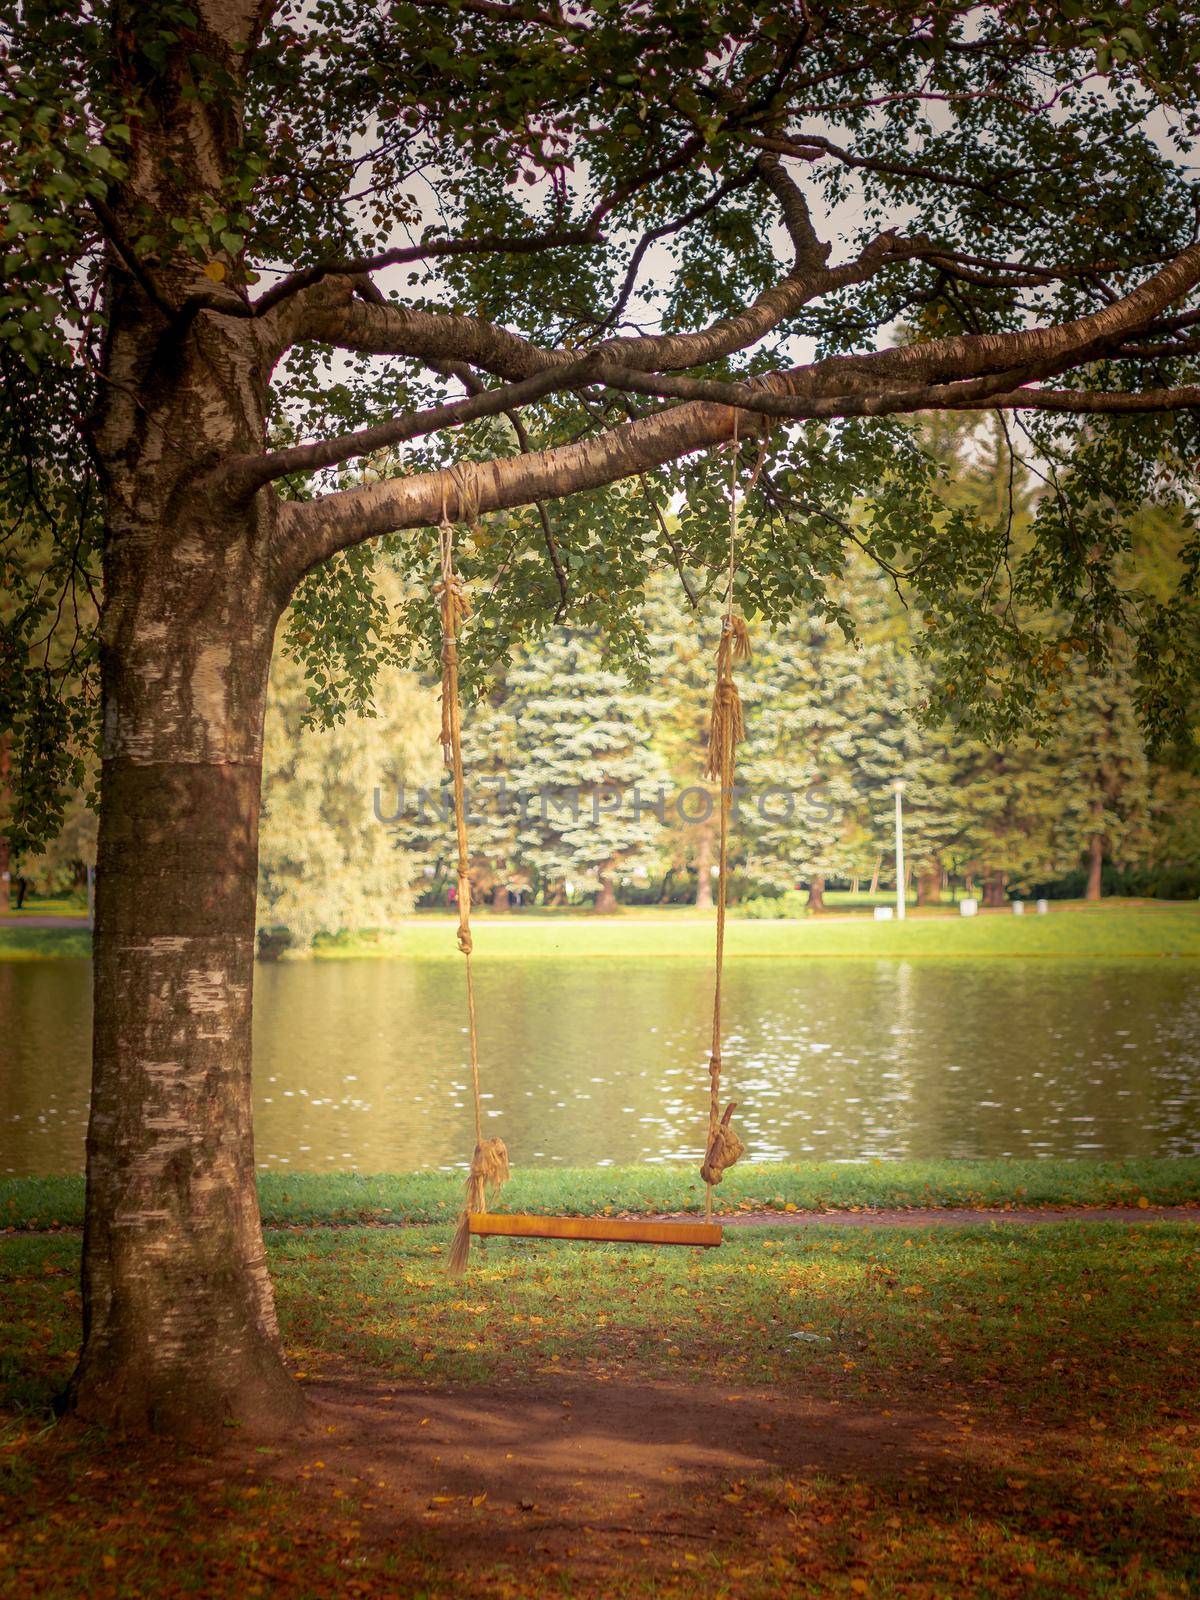 homemade swing from a Board and rope on a tree in a Park or garden, nobody, empty space, autumn background by NataBene